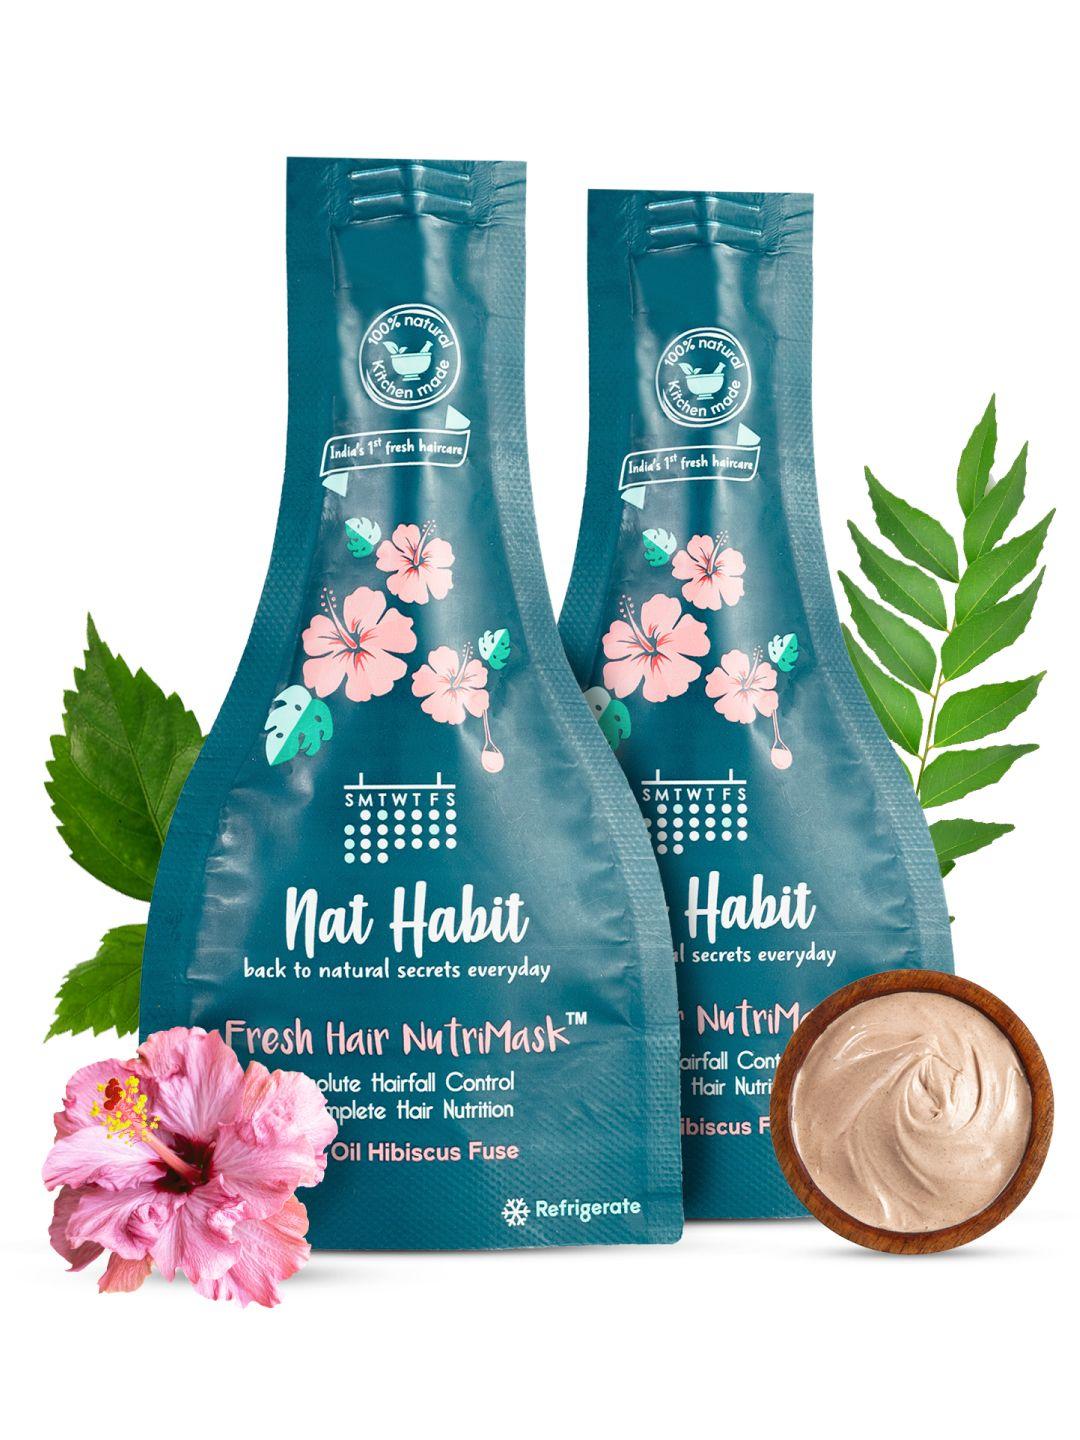 nat habit set of 2 five oil hibiscus hair nutrimask for hair growth & frizzy hair-40g each